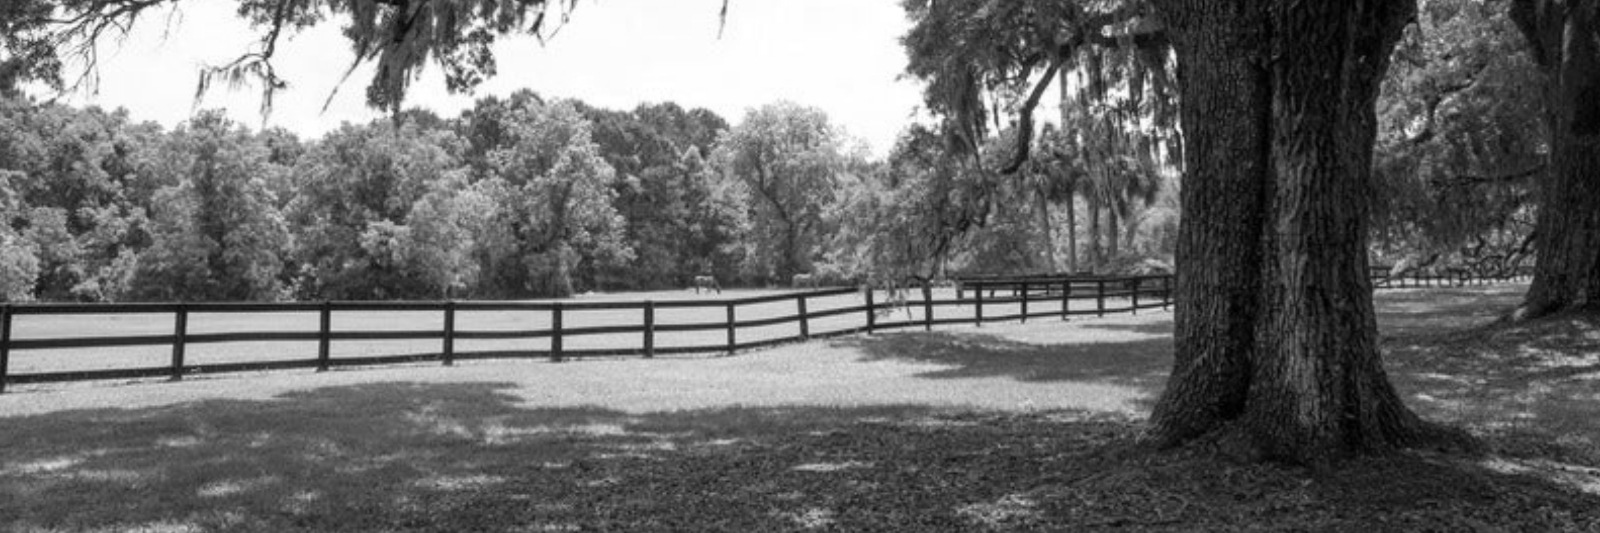 Large oak tree beside pasture with fence